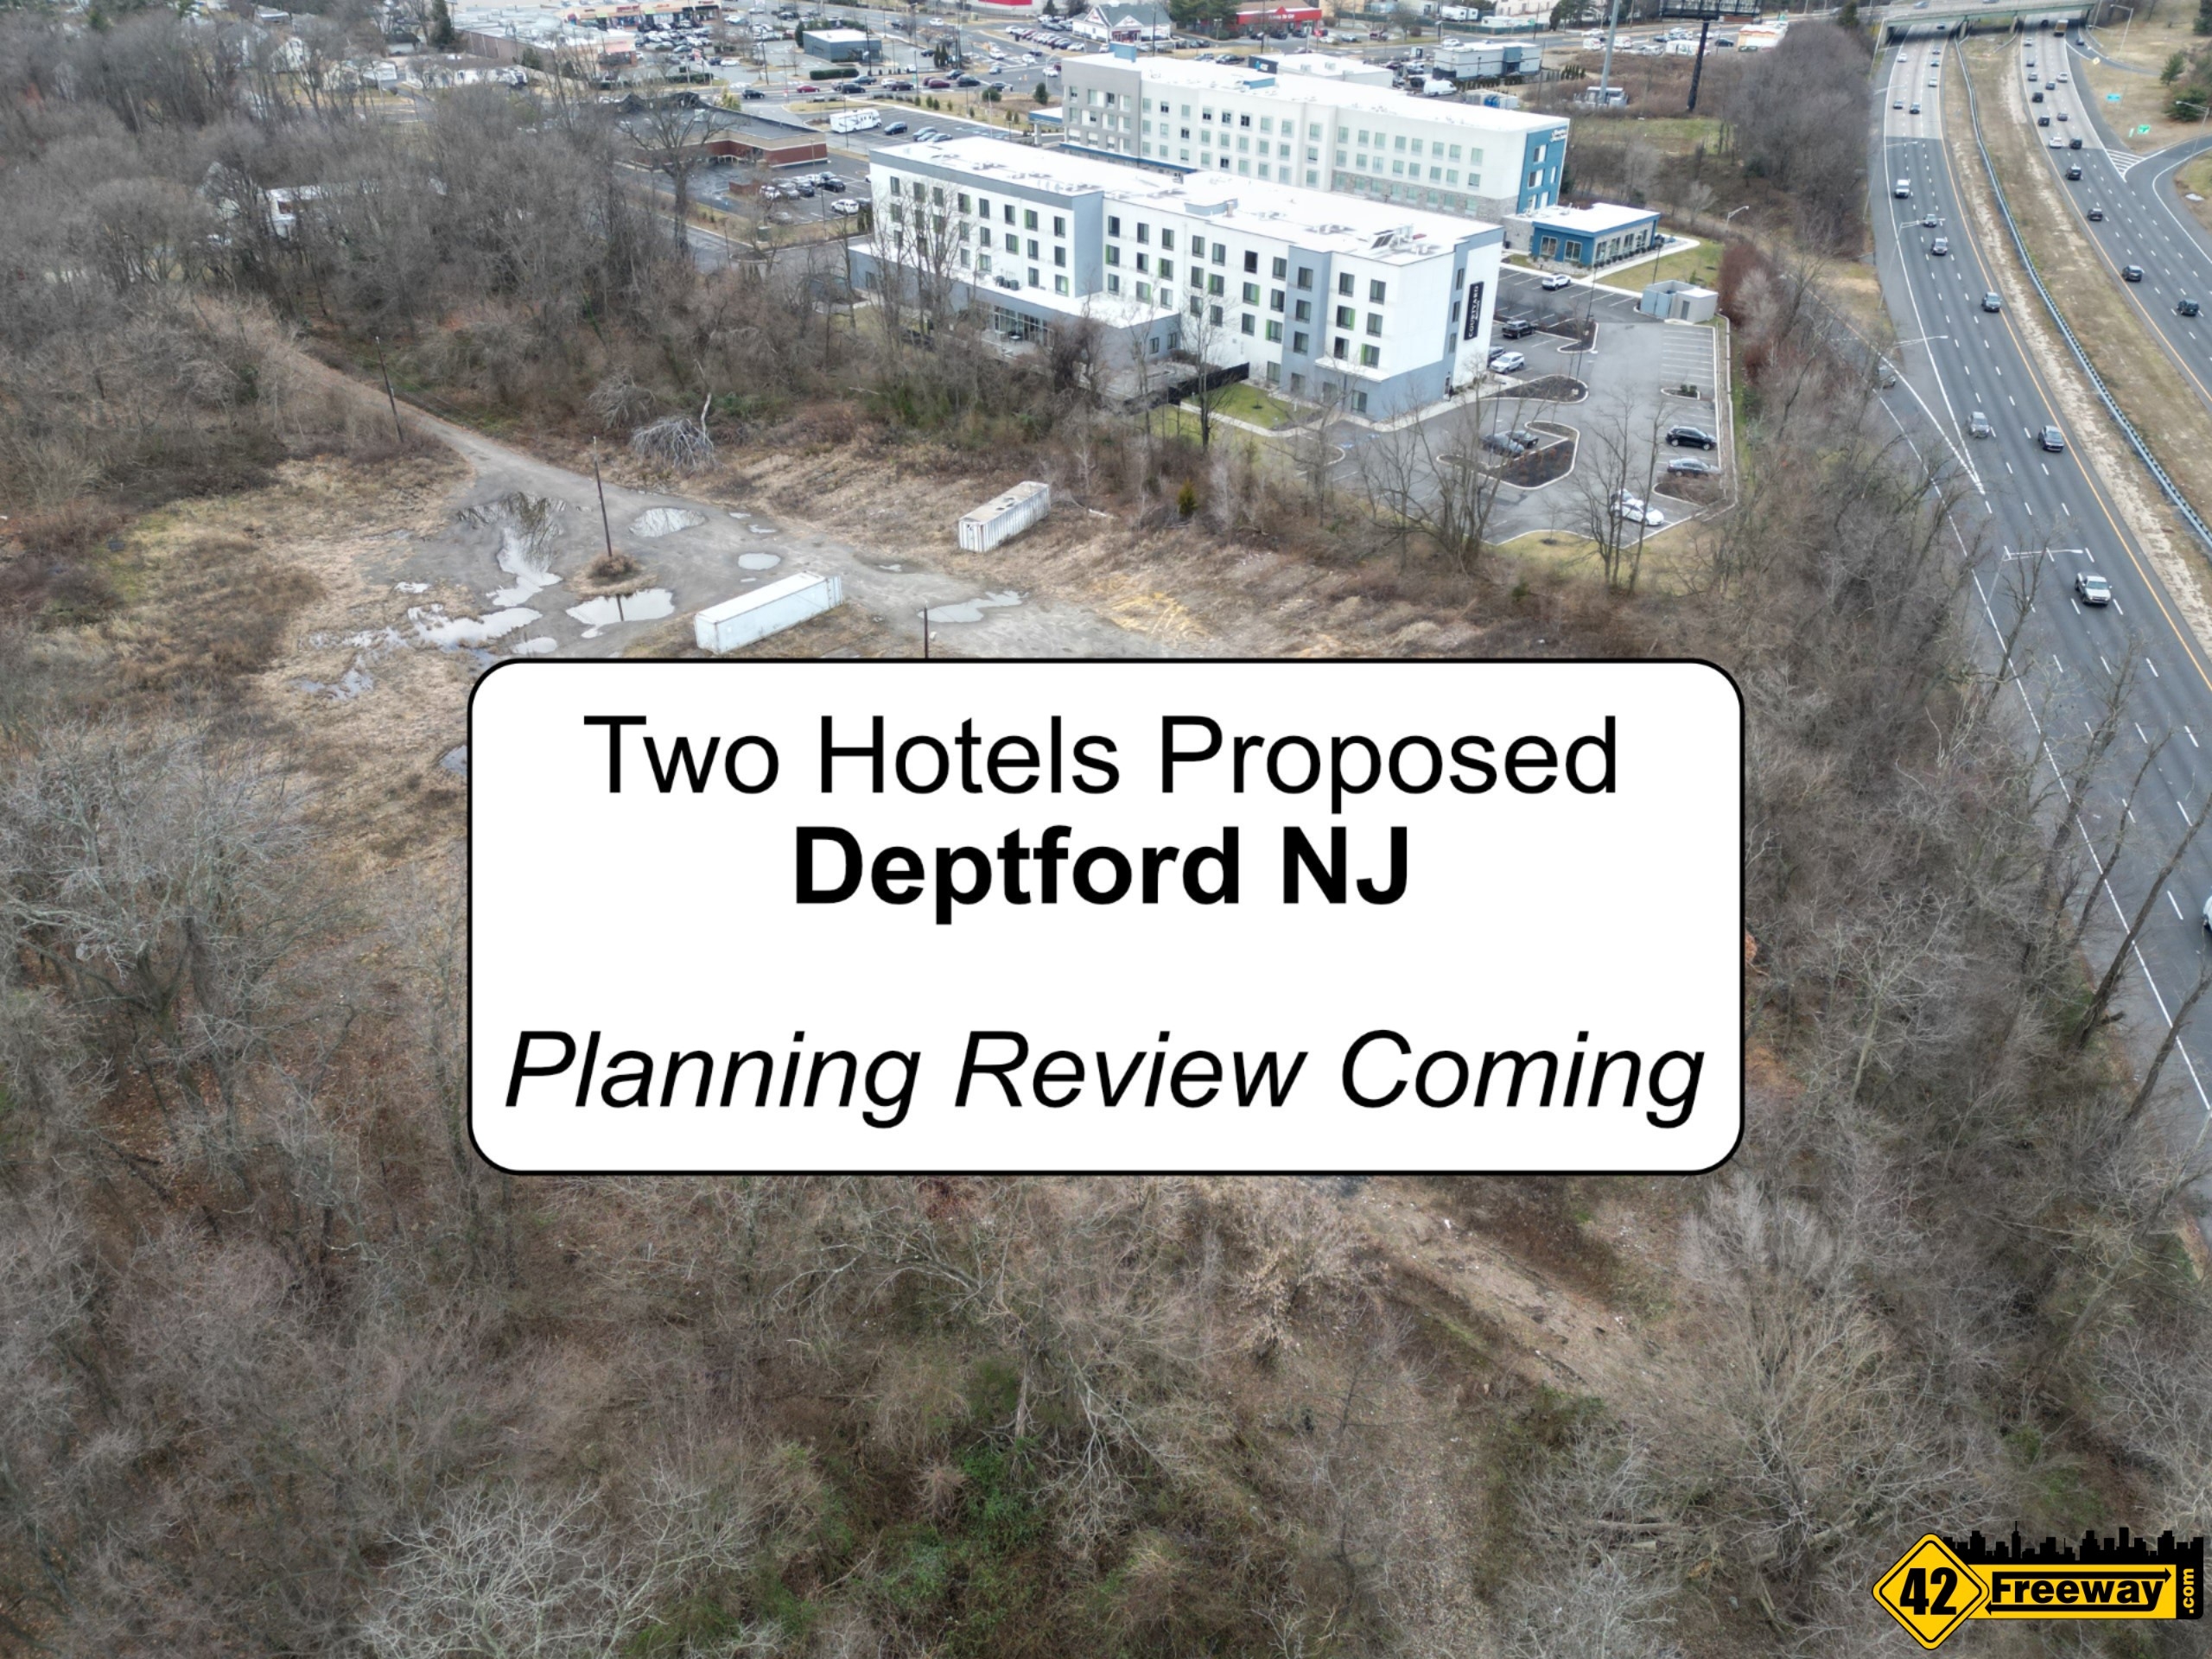 Two New Hotels Proposed For Deptford Route 41 Head to Planning Review - 42  Freeway